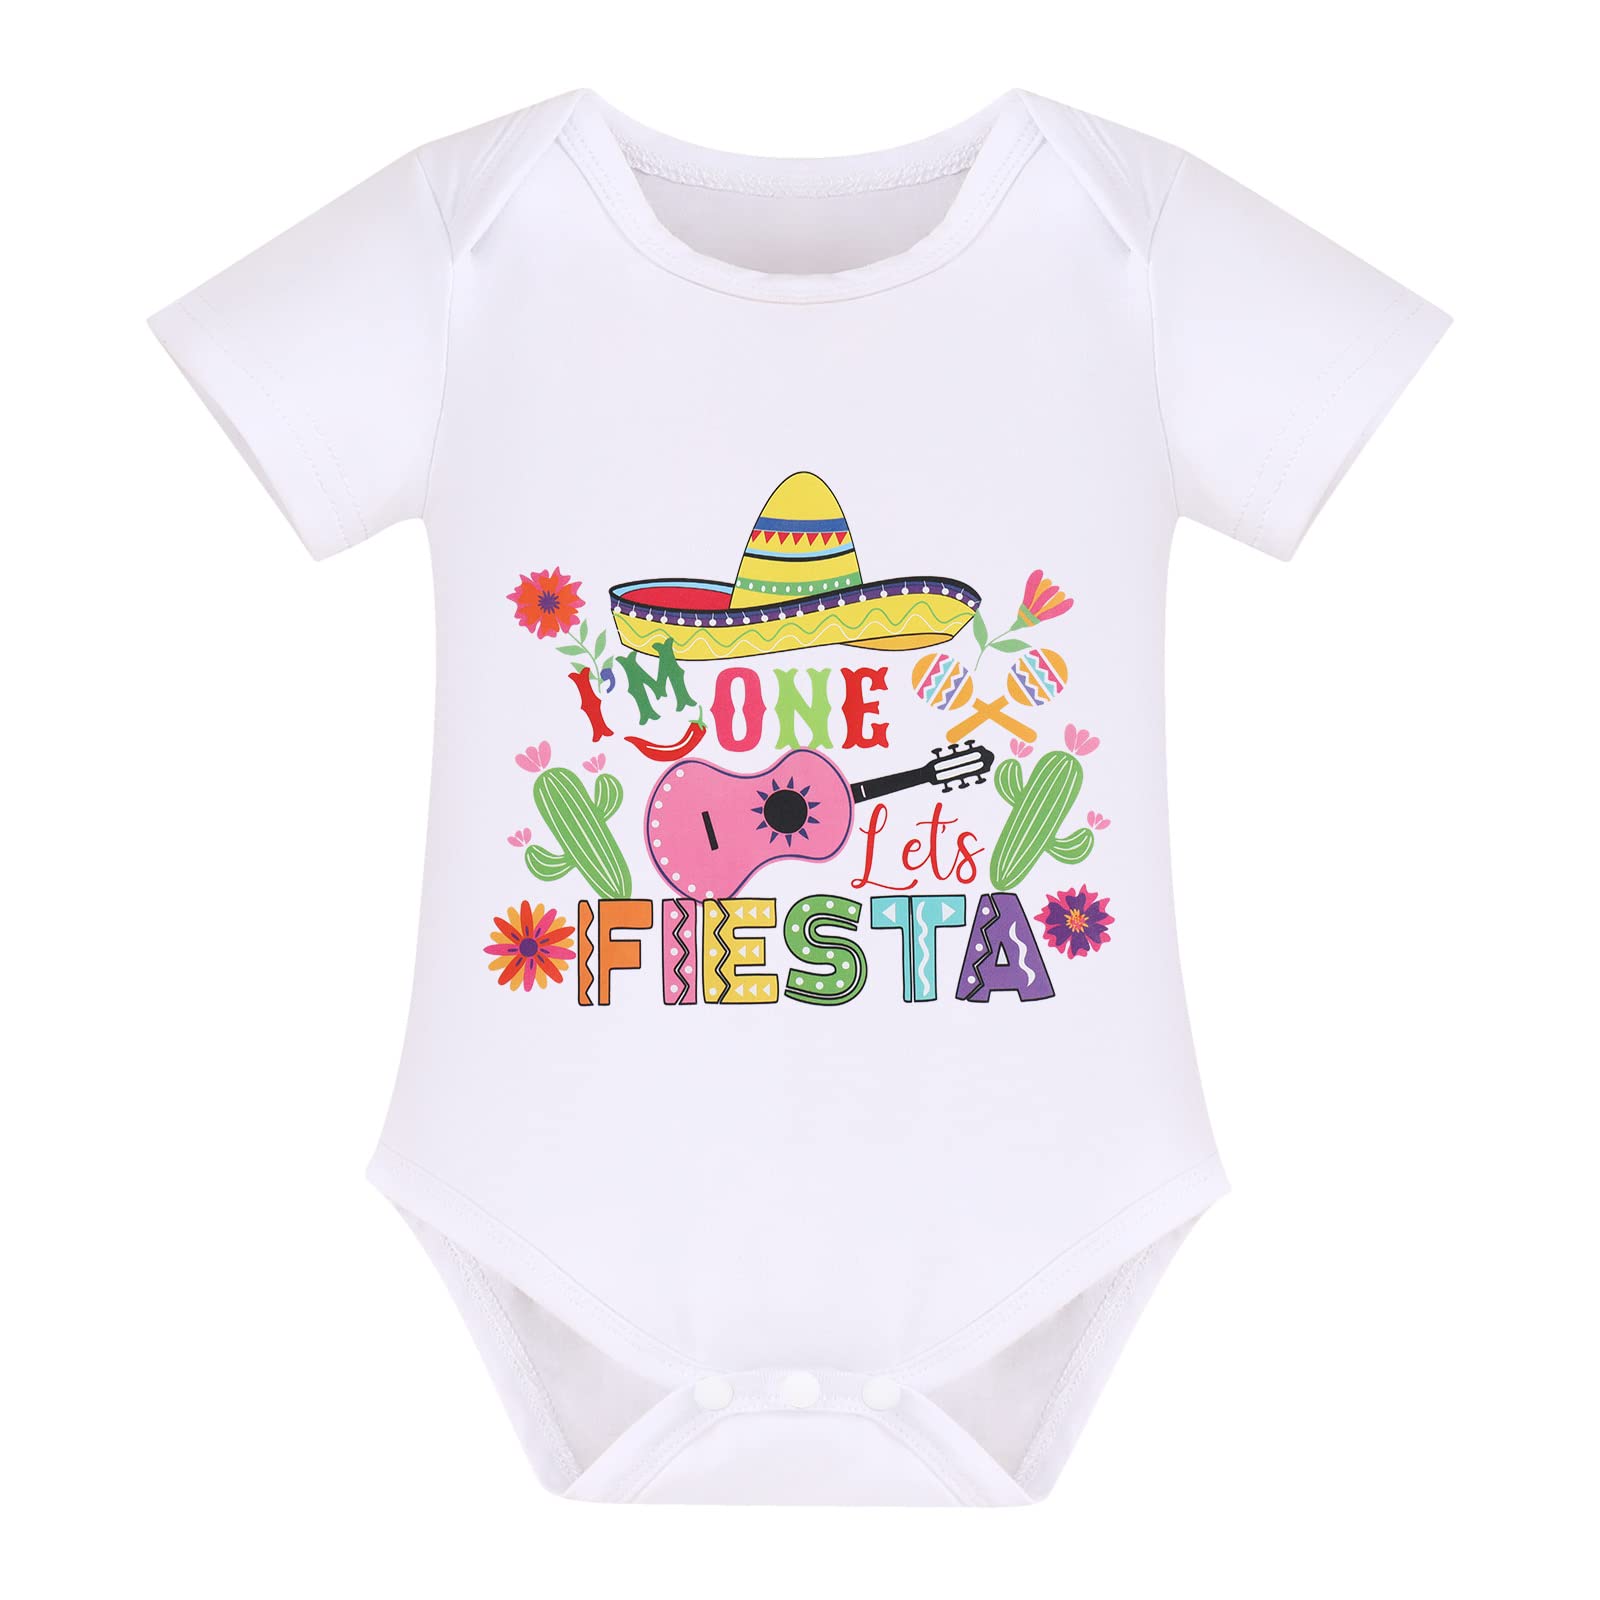 IMEKIS Baby Girl My First Cinco De Mayo Outfit Romper + Rainbow Tutu Skirt + Mexican Sombrero Hat Birthday Cake Smash Clothes